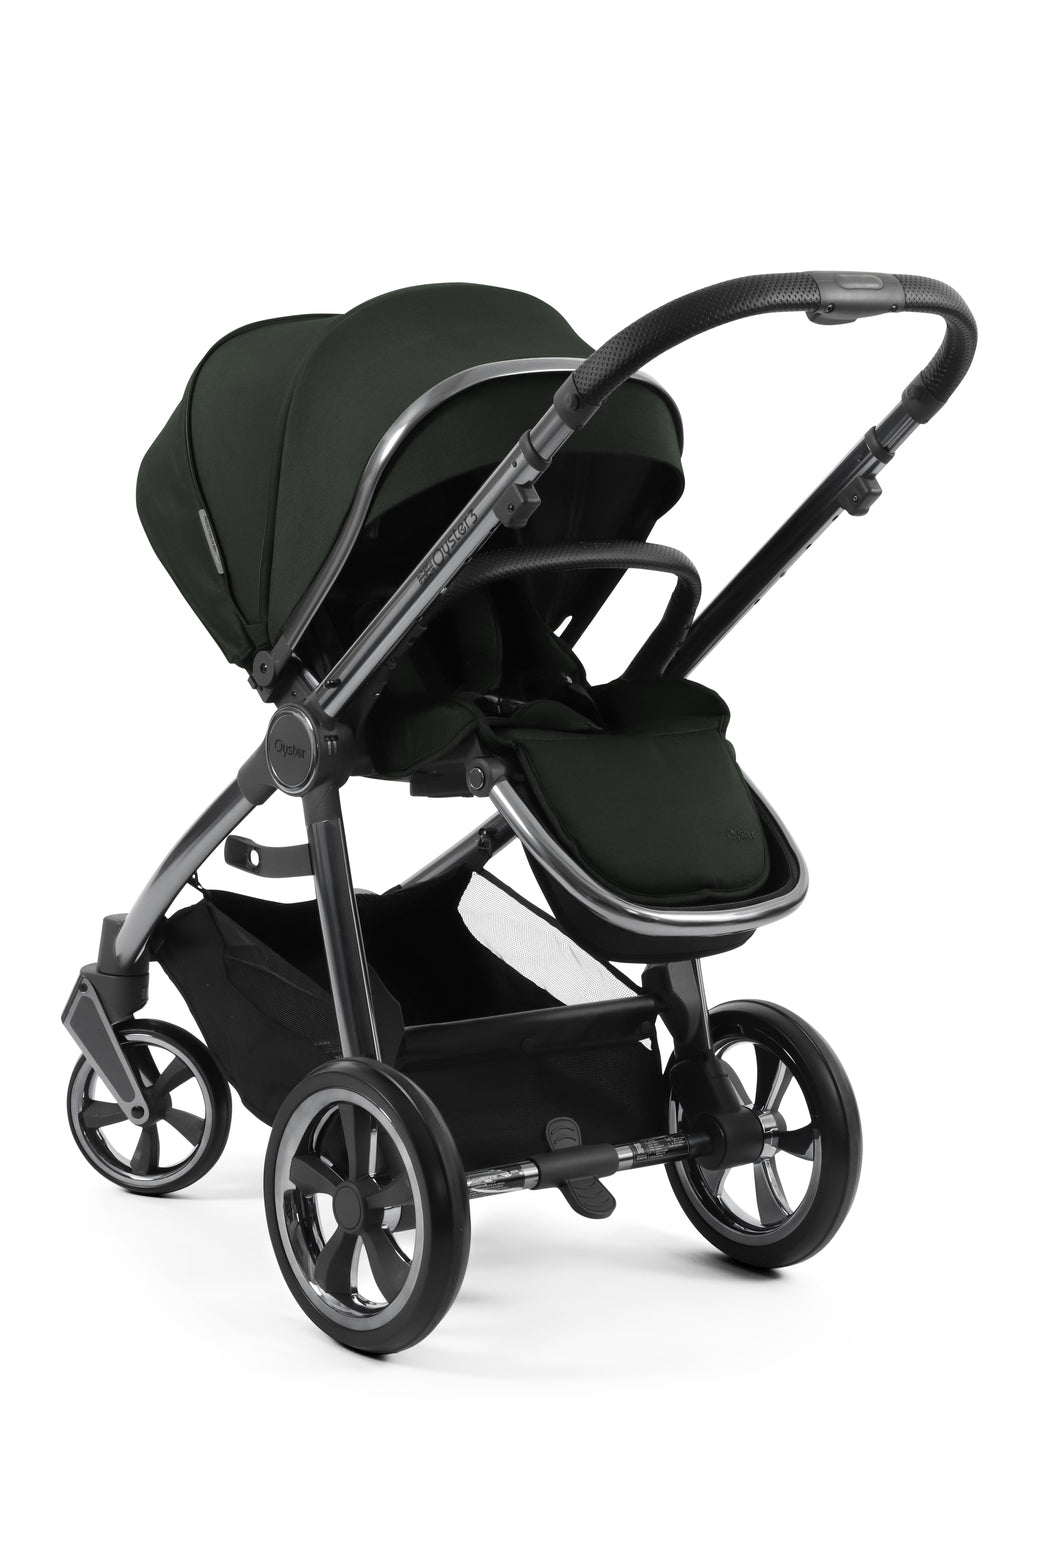 BabyStyle Oyster 3 Pushchair - Black Olive - For Your Little One